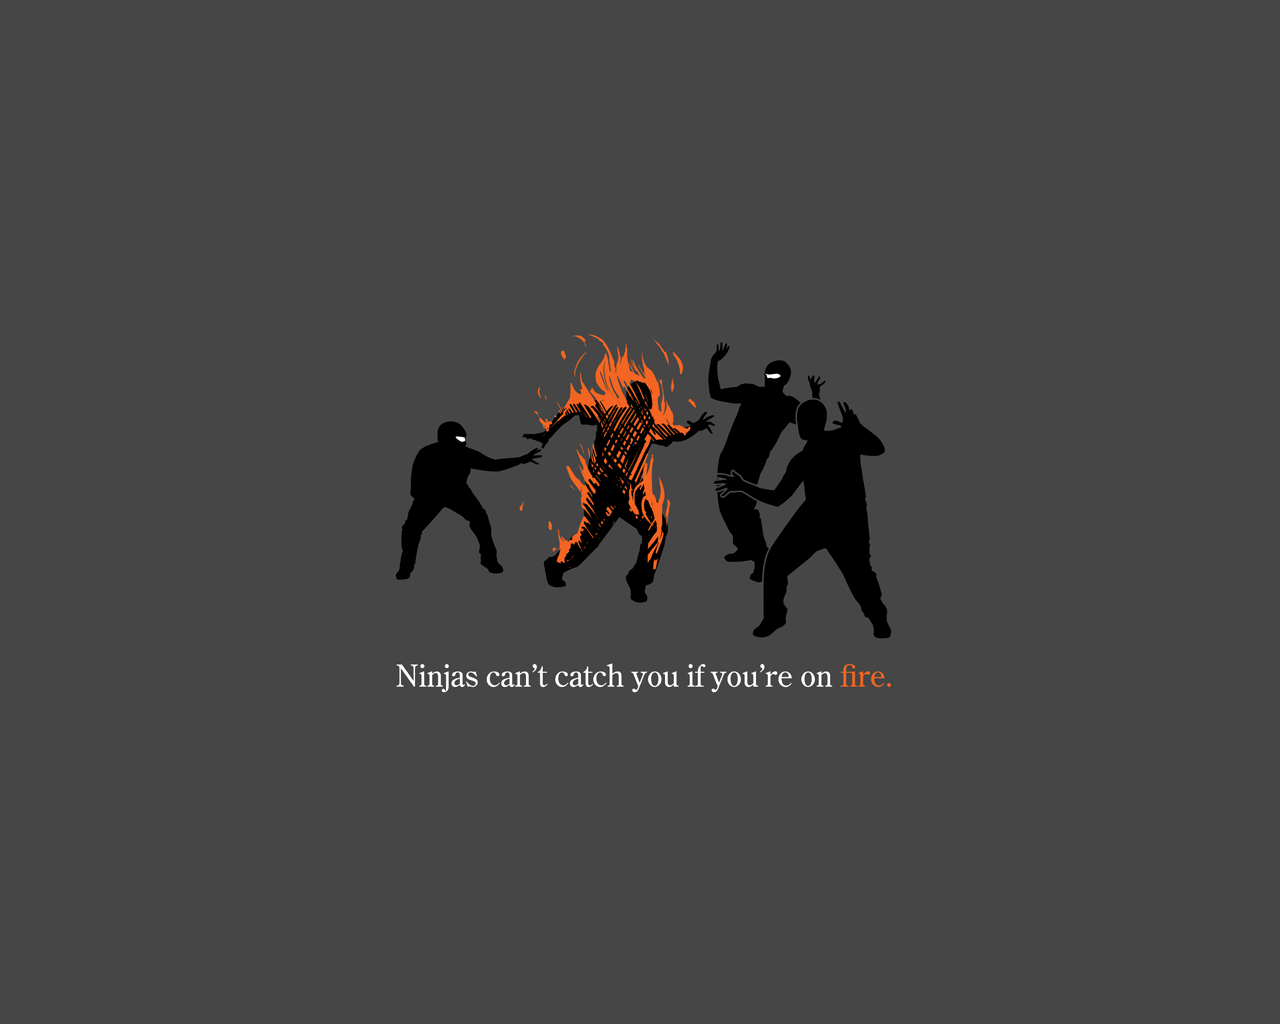 Ninjas can't catch you if you're on fire. Equilibrium movie